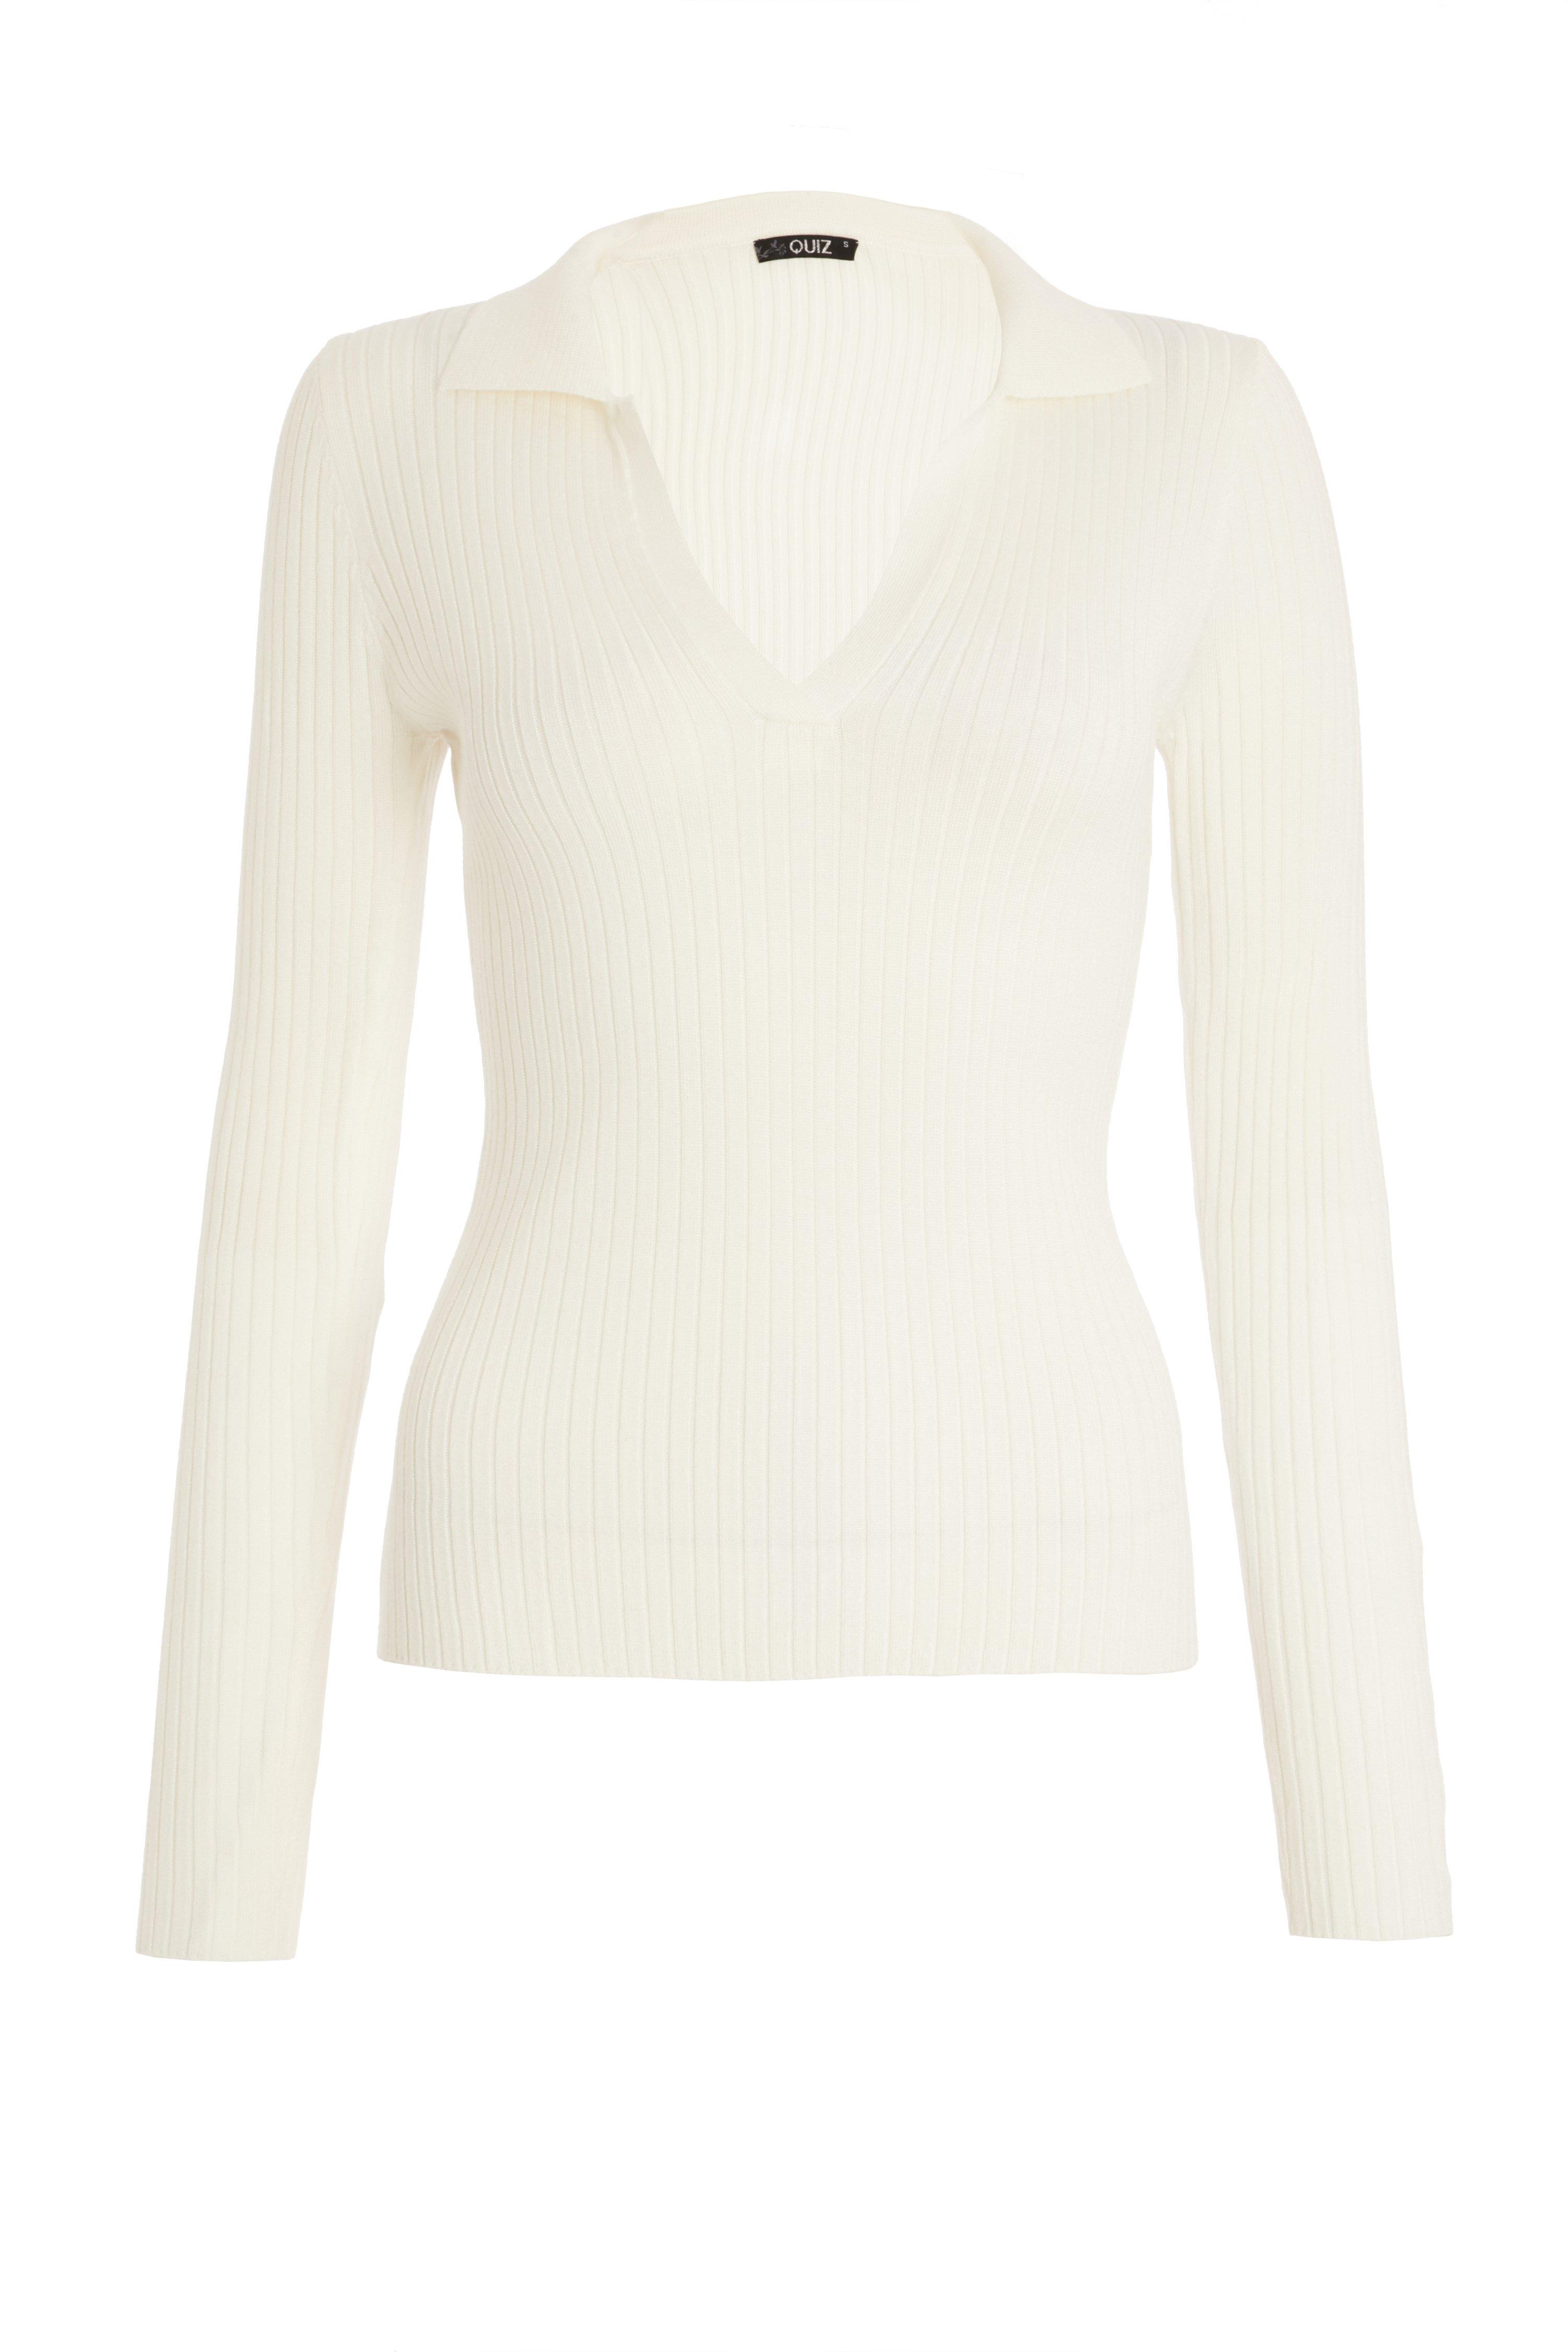 White Light Knit Polo Top - Quiz Clothing